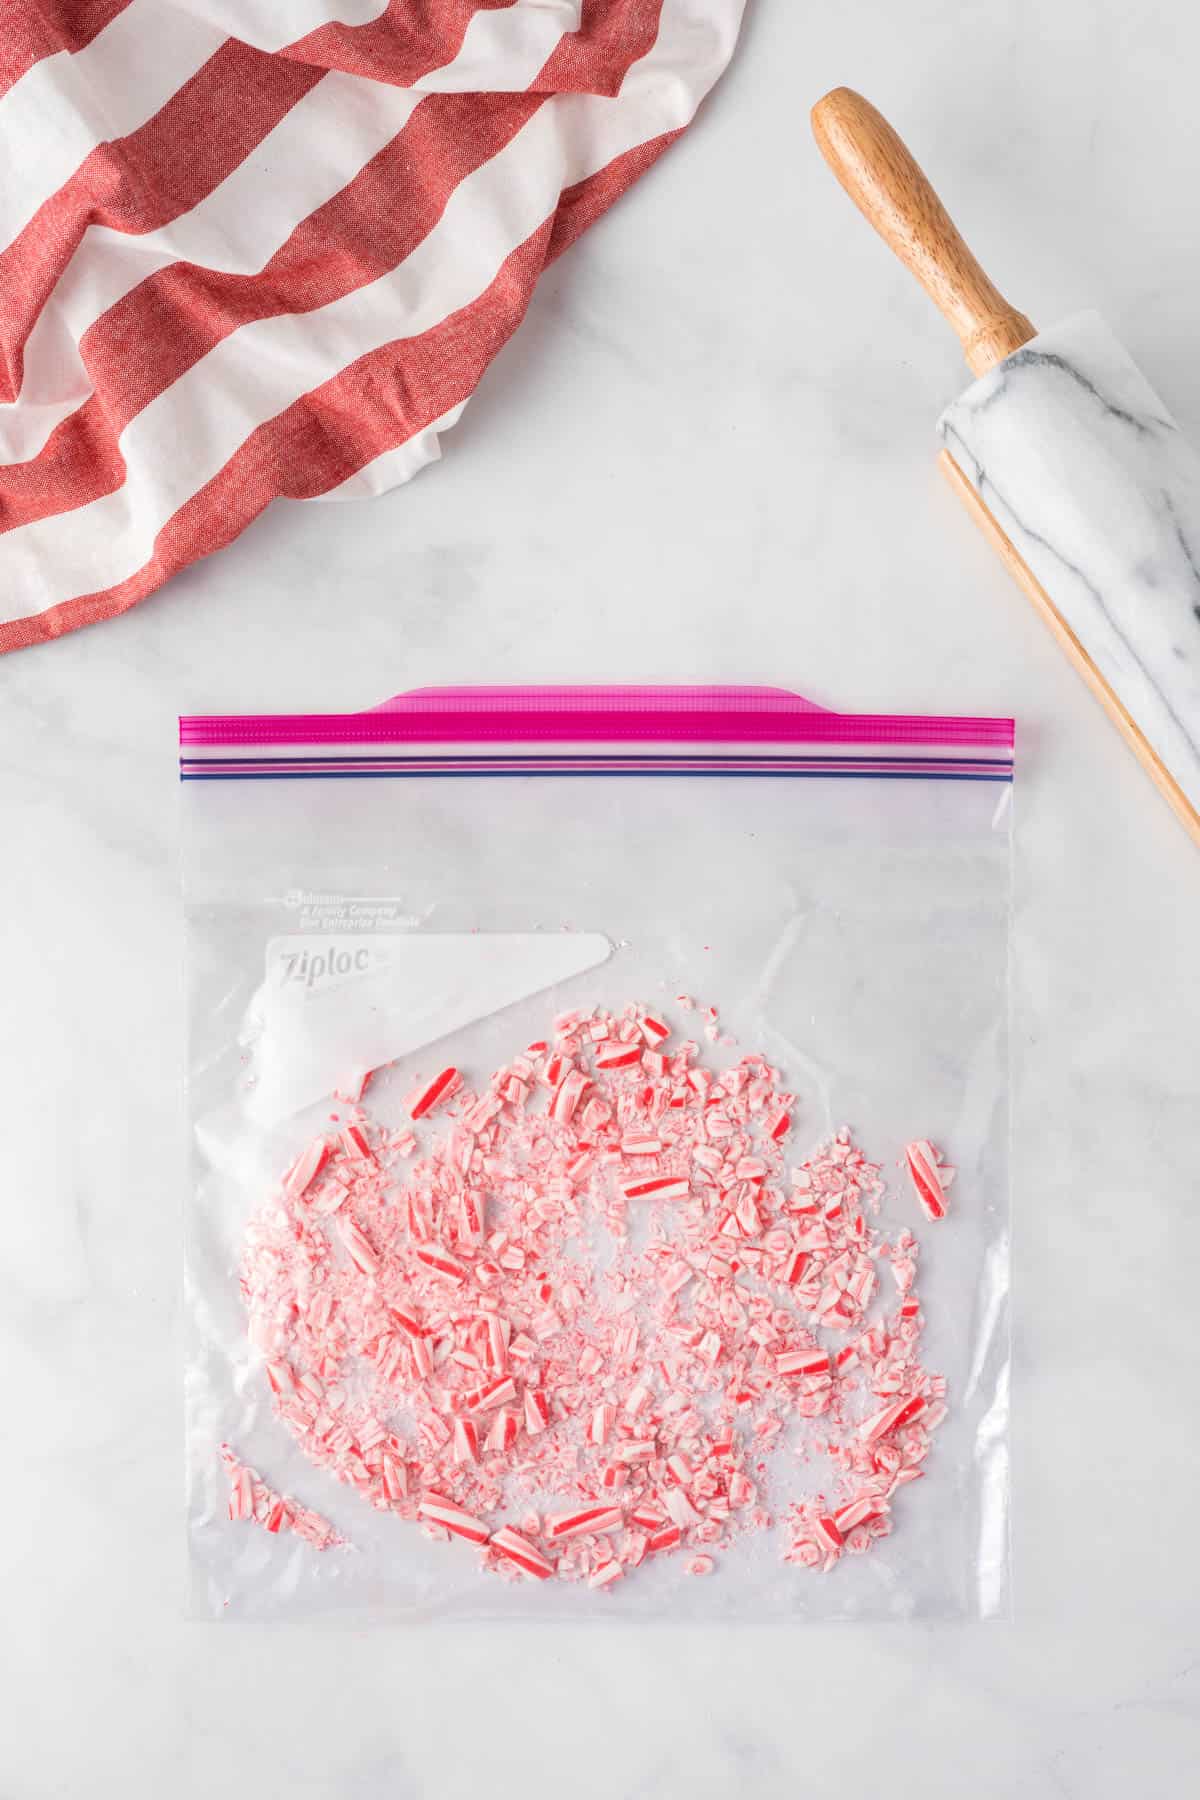 crushed candy canes in a ziploc bag